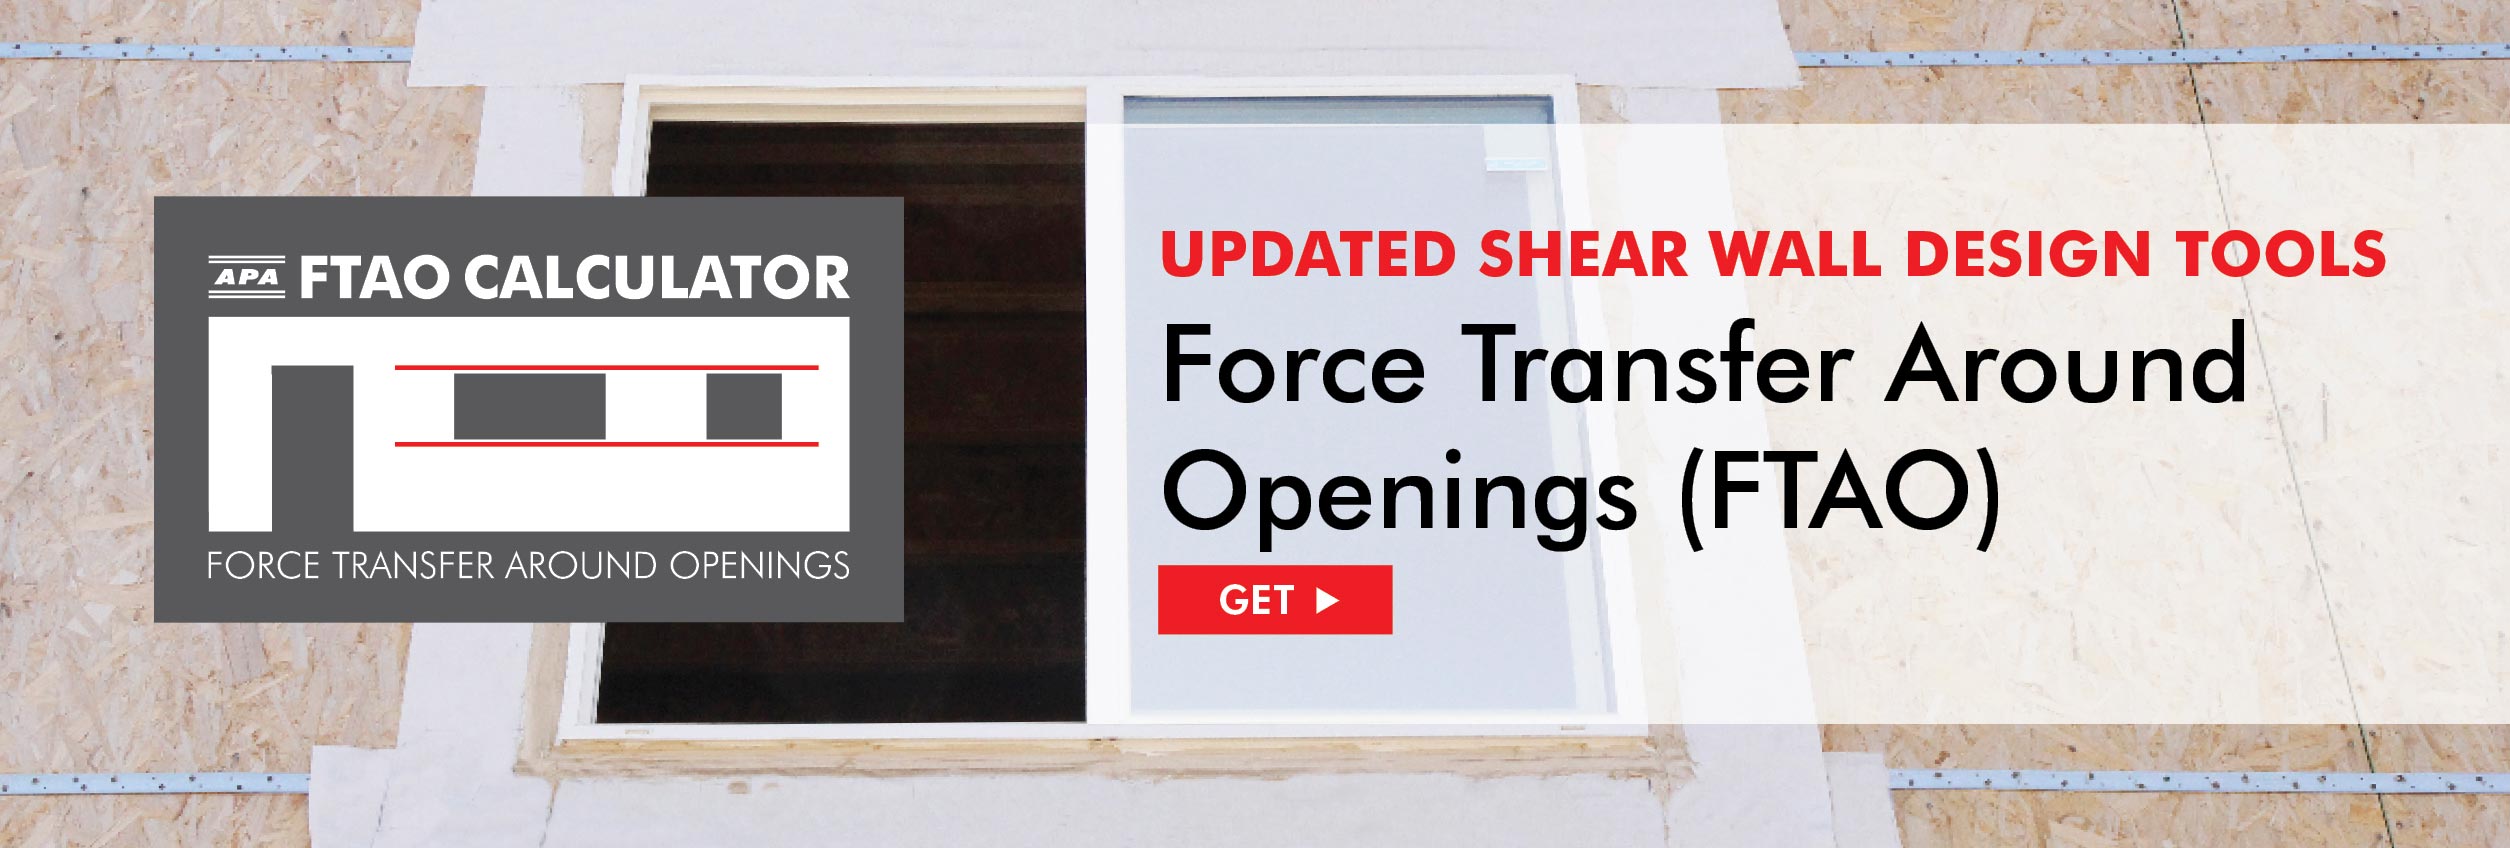 Force Transfer Around Openings